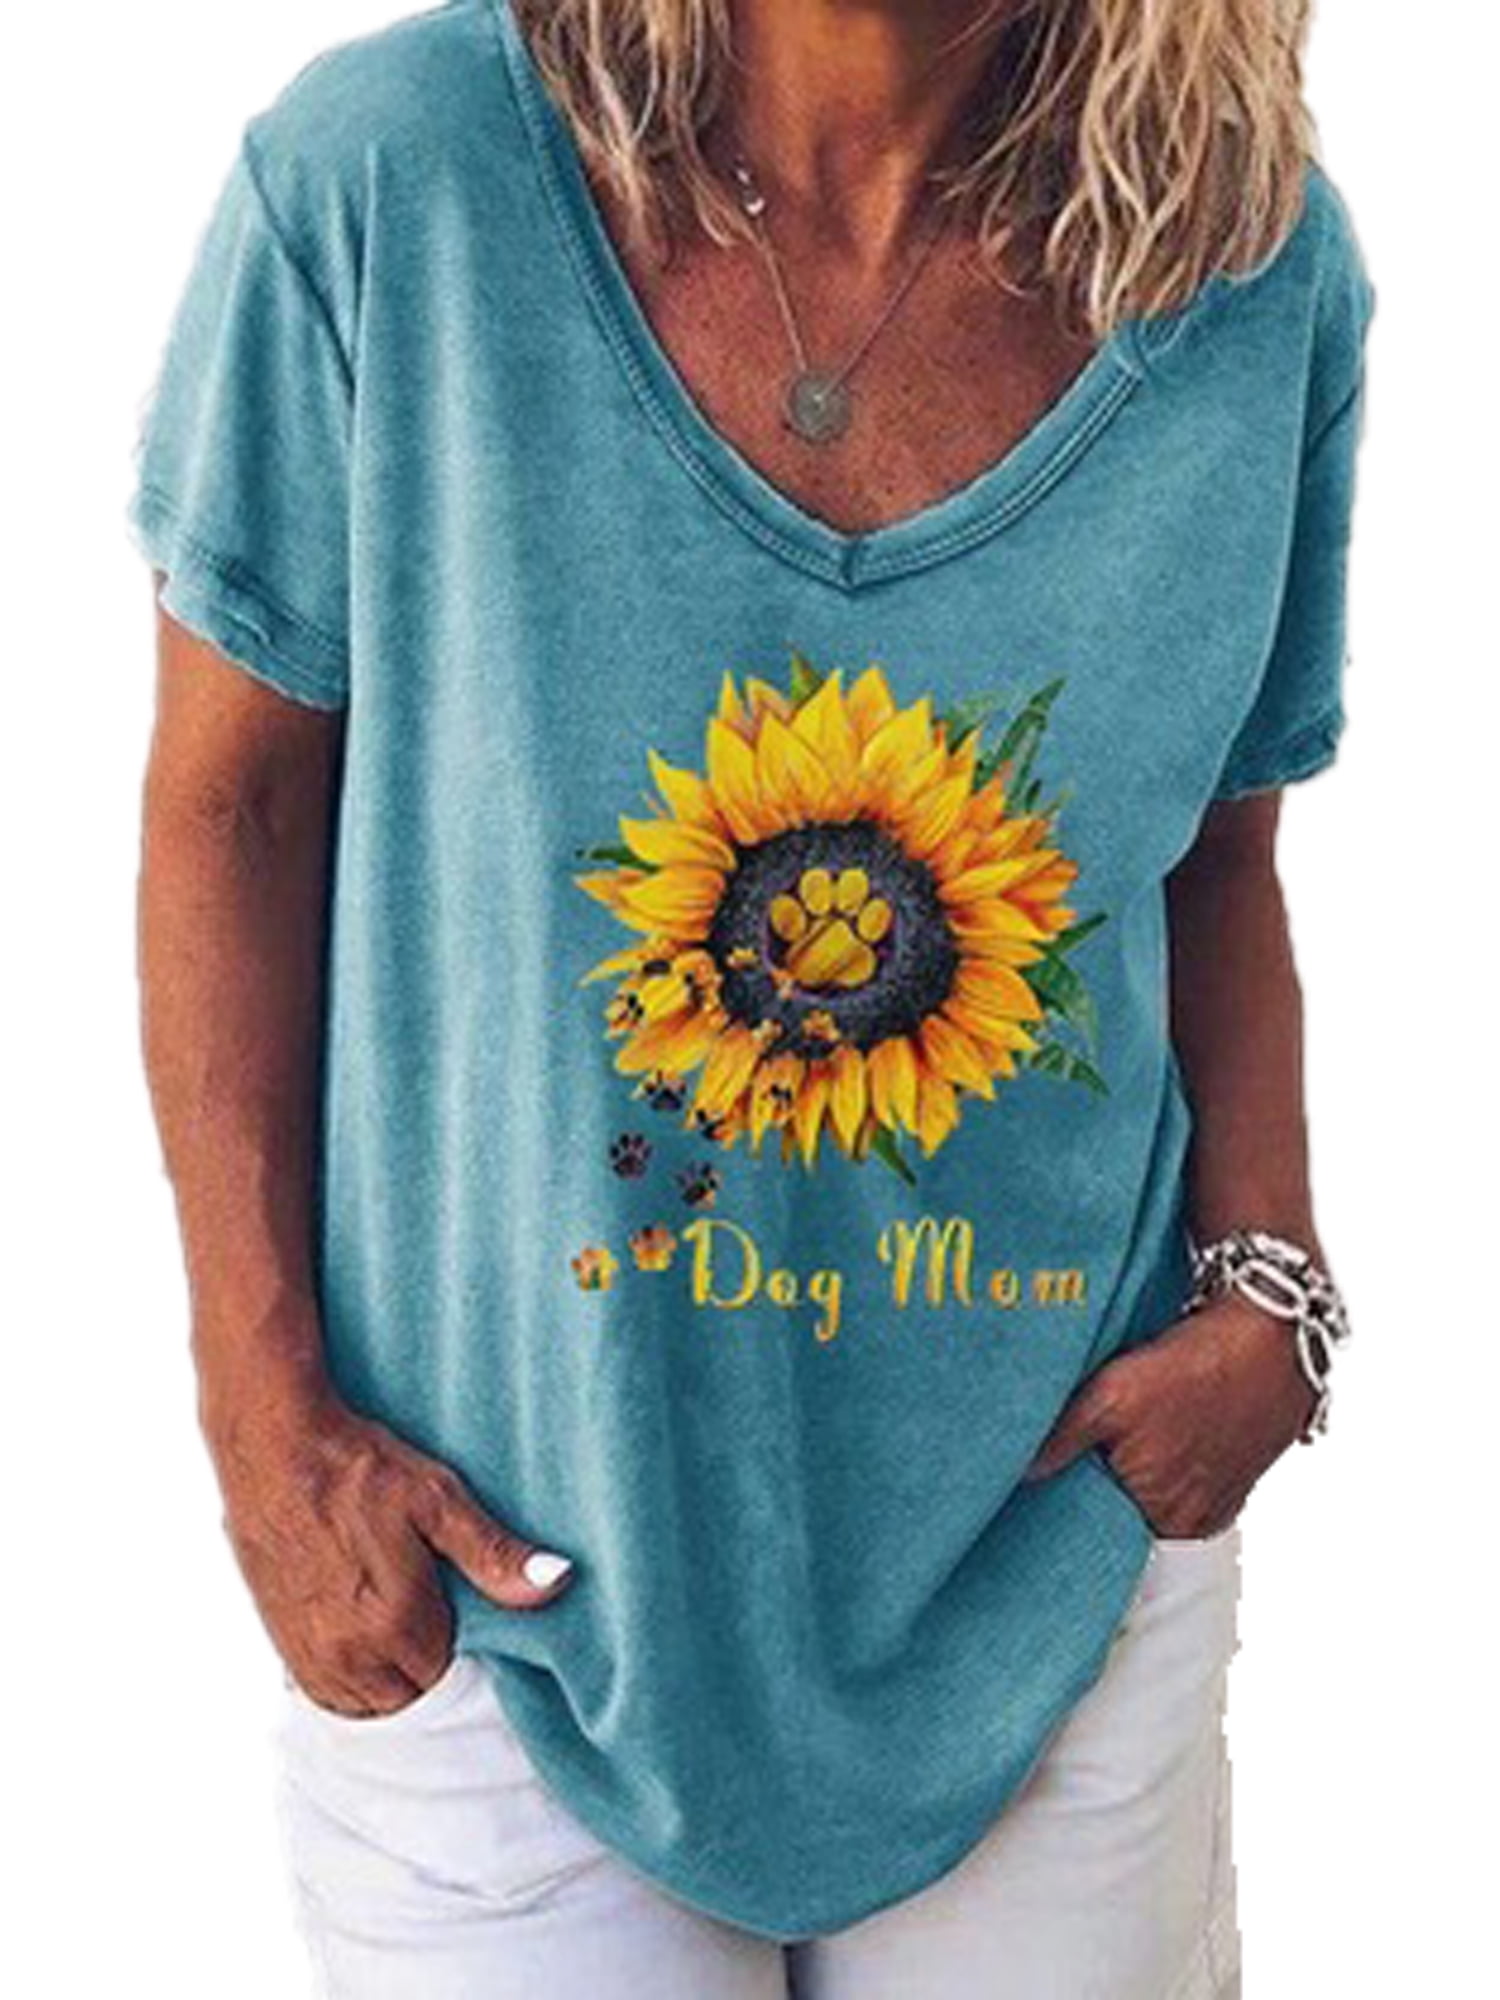 Womens Summer Tops Gradient Sunflower Print Short Sleeve T-Shirt Casual O-Neck T Shirts Graphic Tees Plus Size Tshirts 